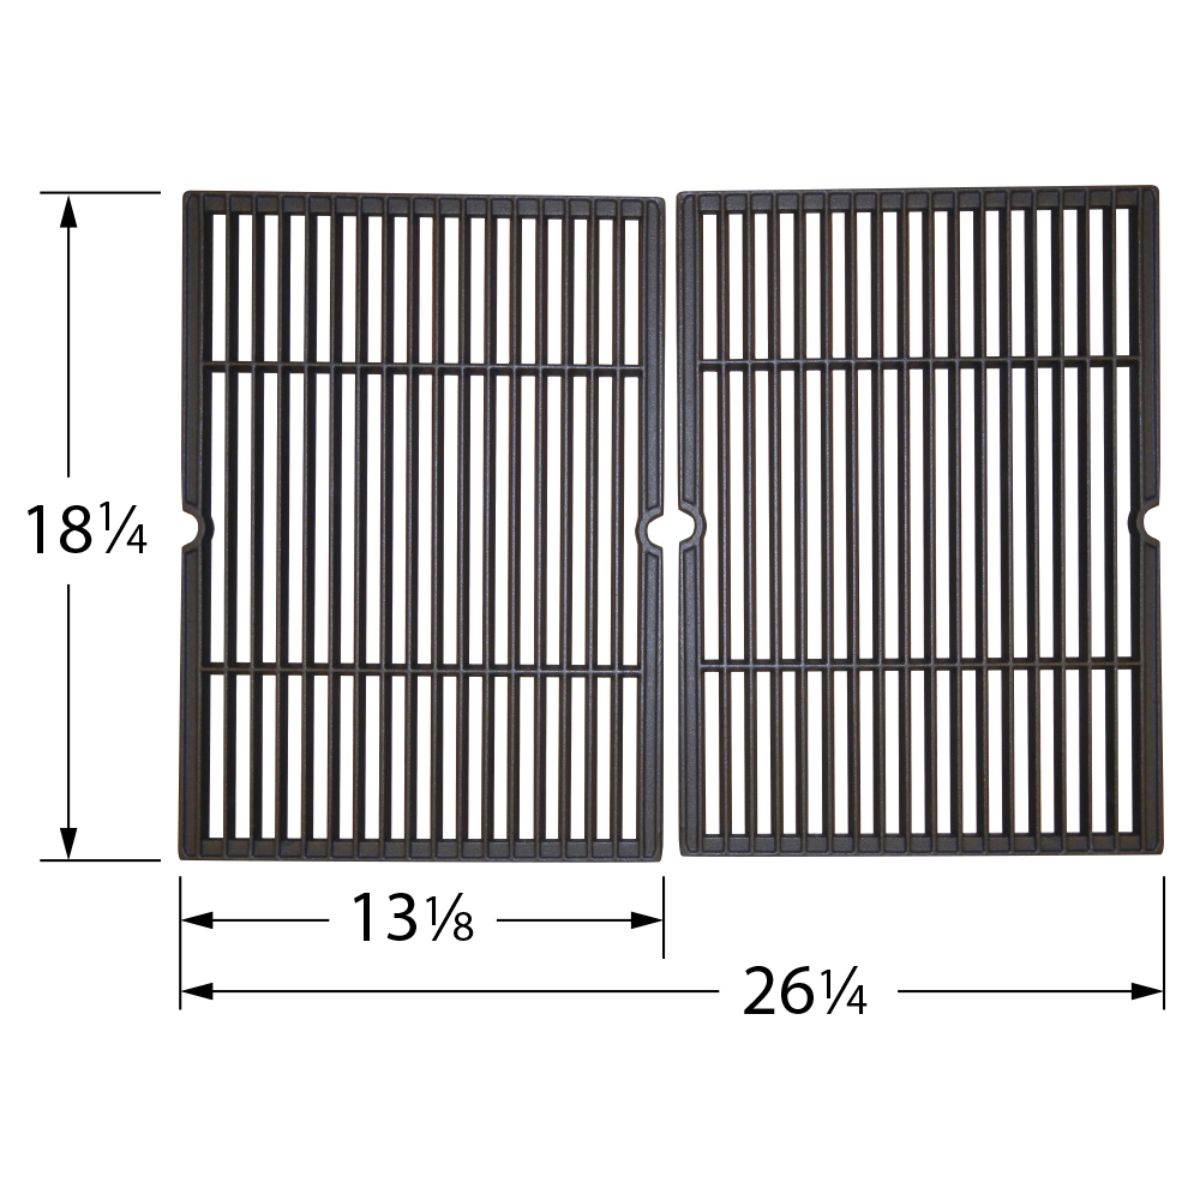 Contemporary Home Living 2pc Matte Cast Iron Cooking Grid for Charbroil and Master Forge Gas Grills 26.25"